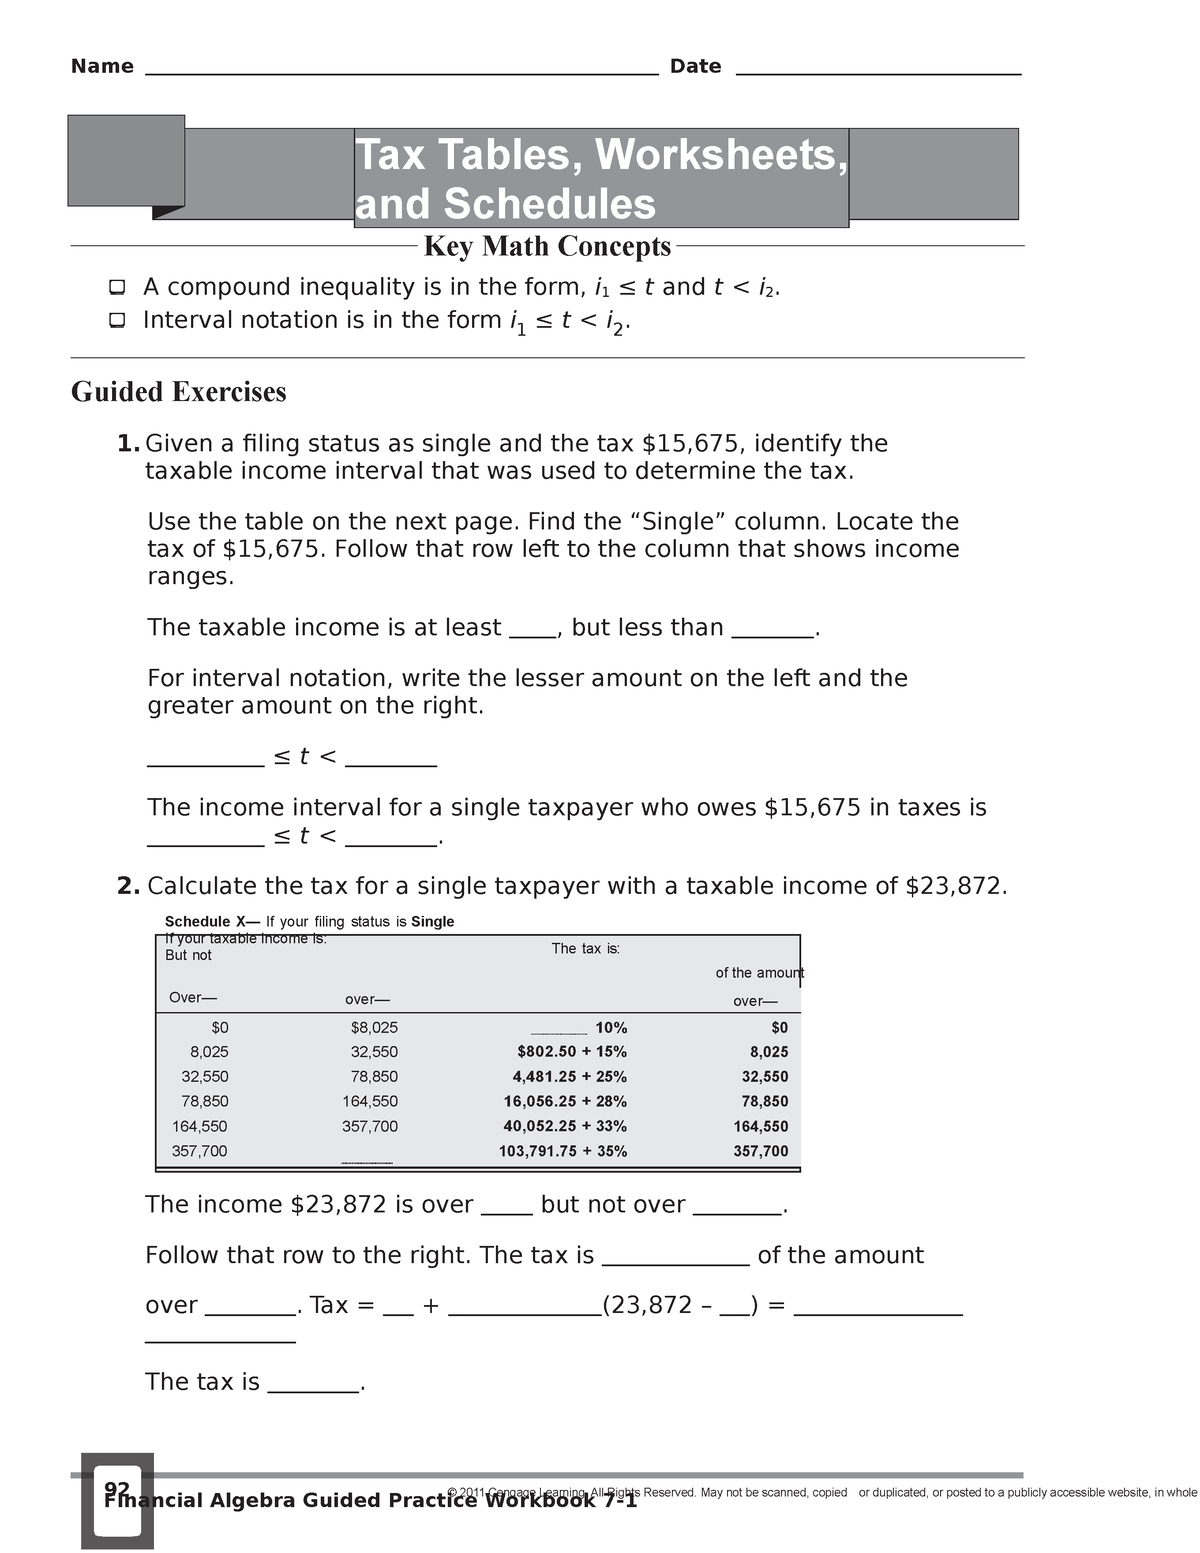 lesson-7-1-worksheet-tax-tables-worksheets-7-and-schedules-schedule